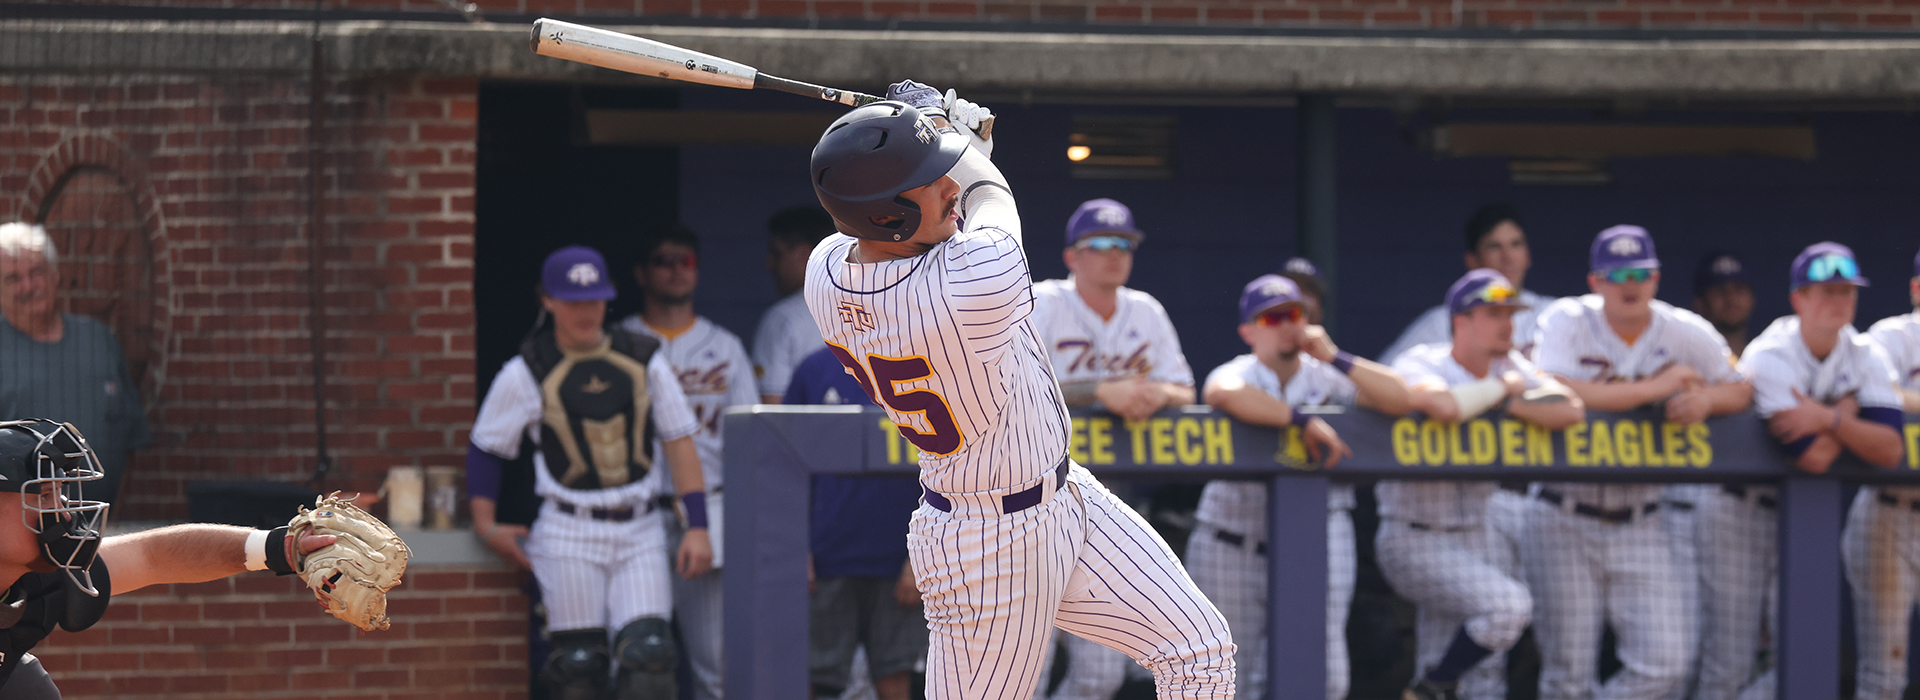 Tech mashes six home runs on way to sweep of Purdue Fort Wayne, 10-0 start